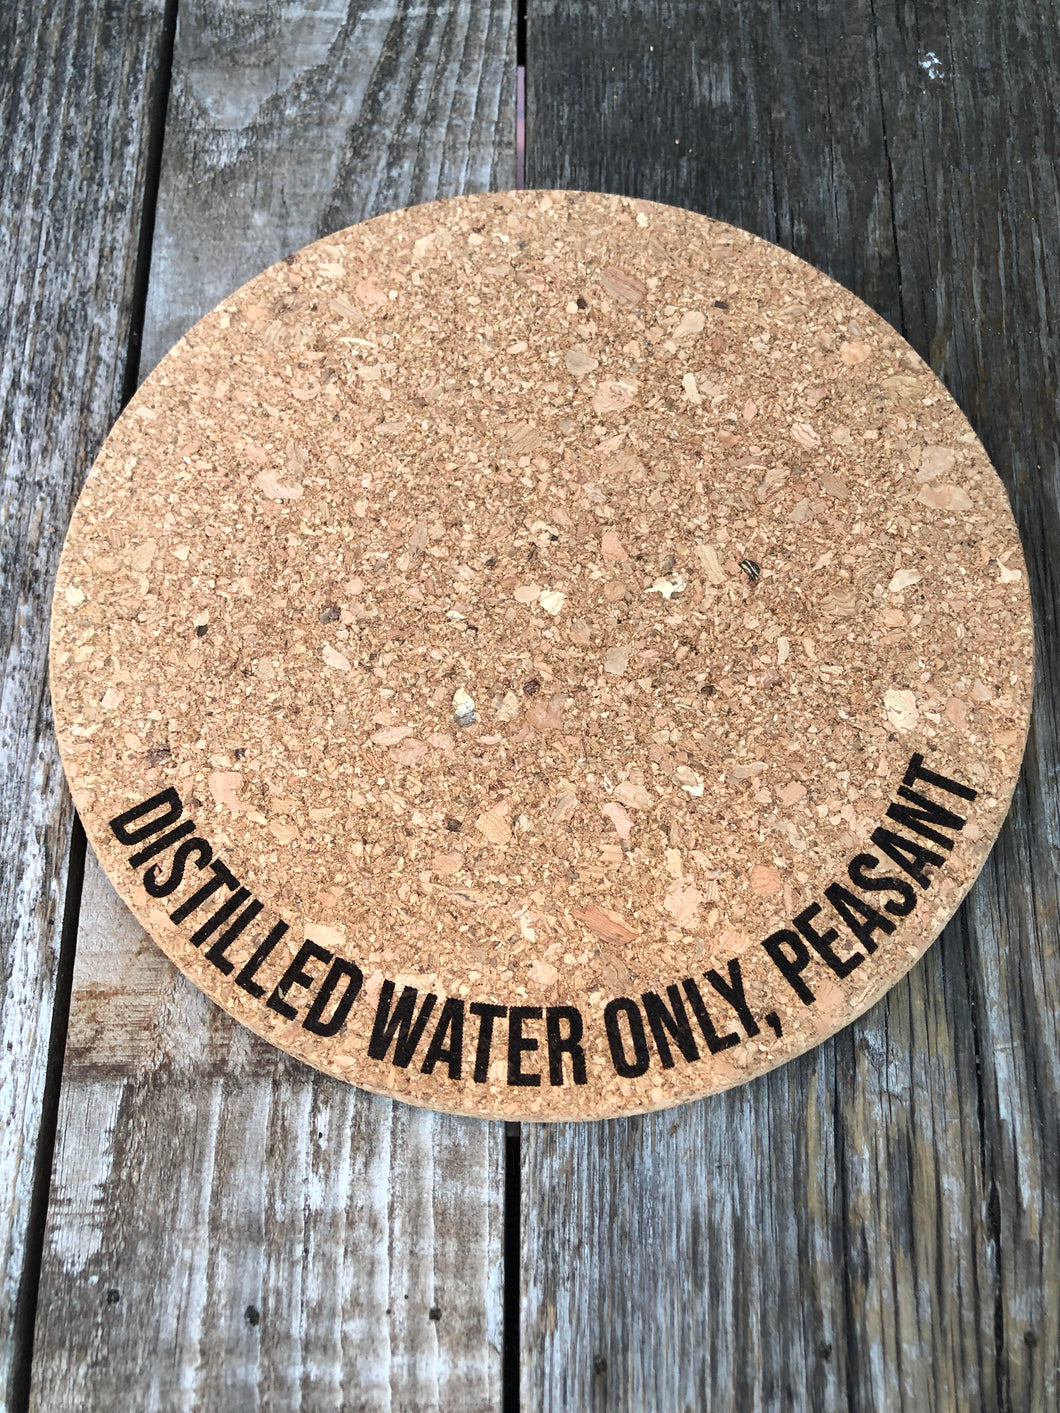 Distilled Water Only, Peasant Plant Mat - Engraved Cork Round - Cork Bottom - No Plastic or Rubber - All Natural Material